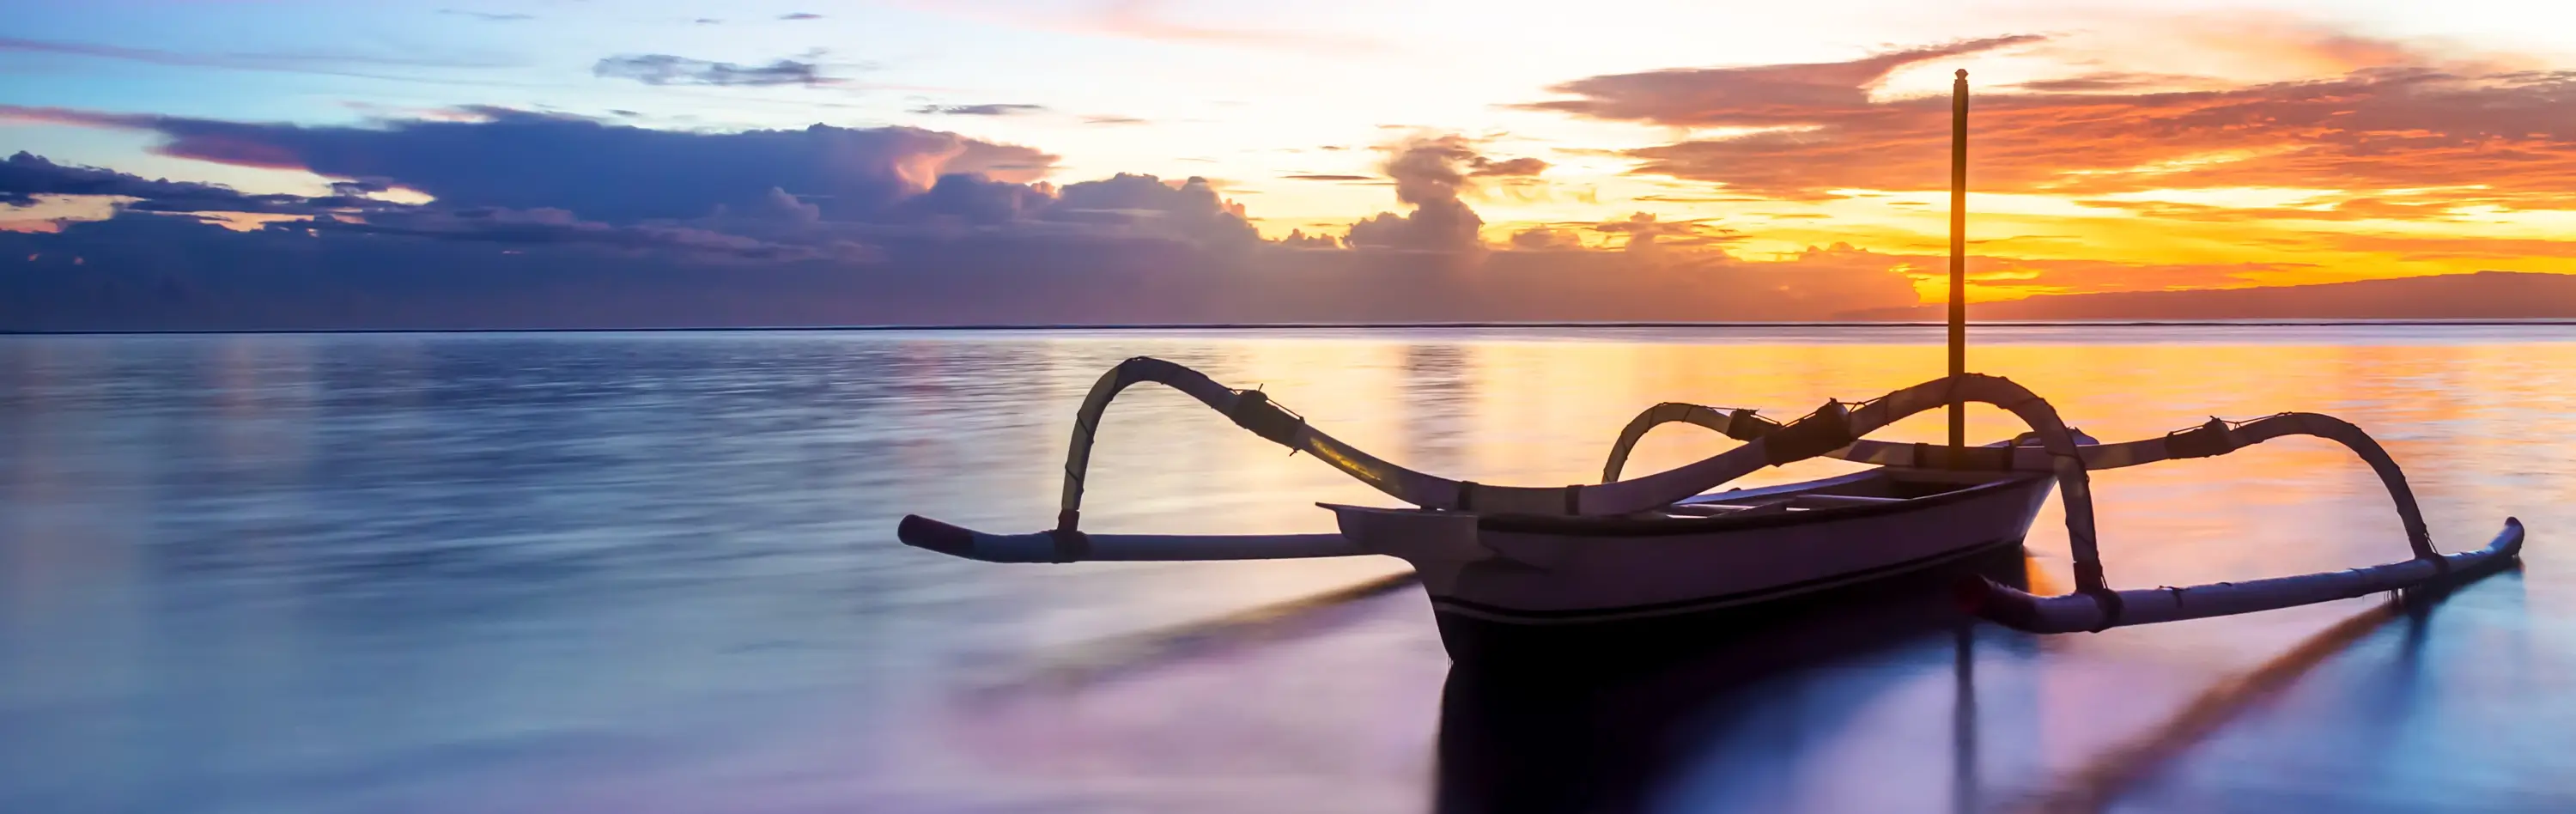 A tranquil sea, with calm waters and outrigger floating, reflects the potential for beauty in life when one achieves optimal mental wellness